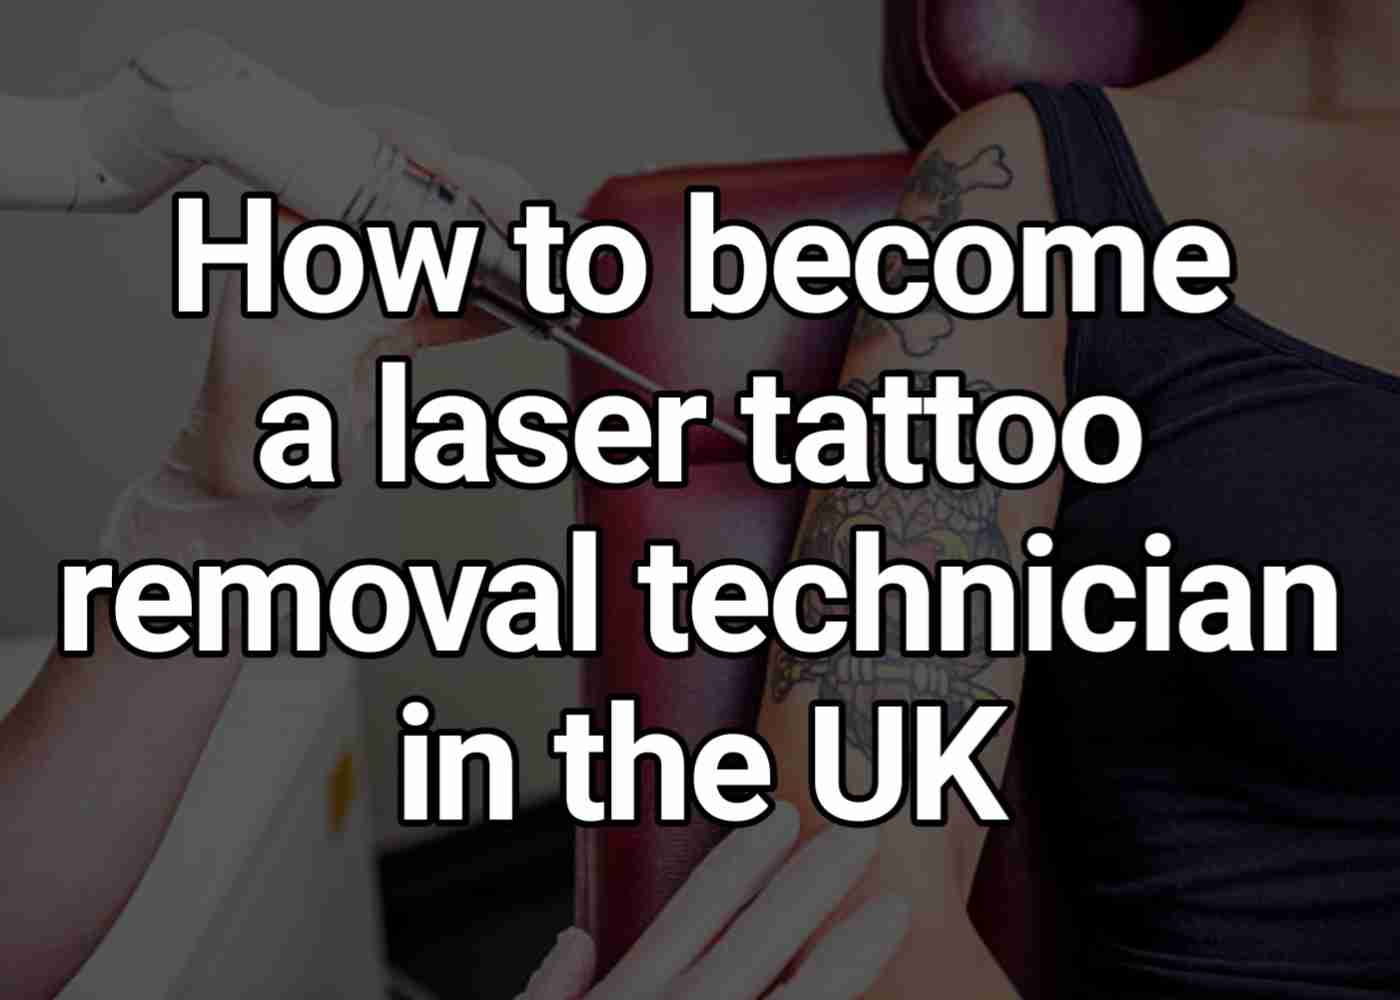 How to become a laser tattoo removal technician UK